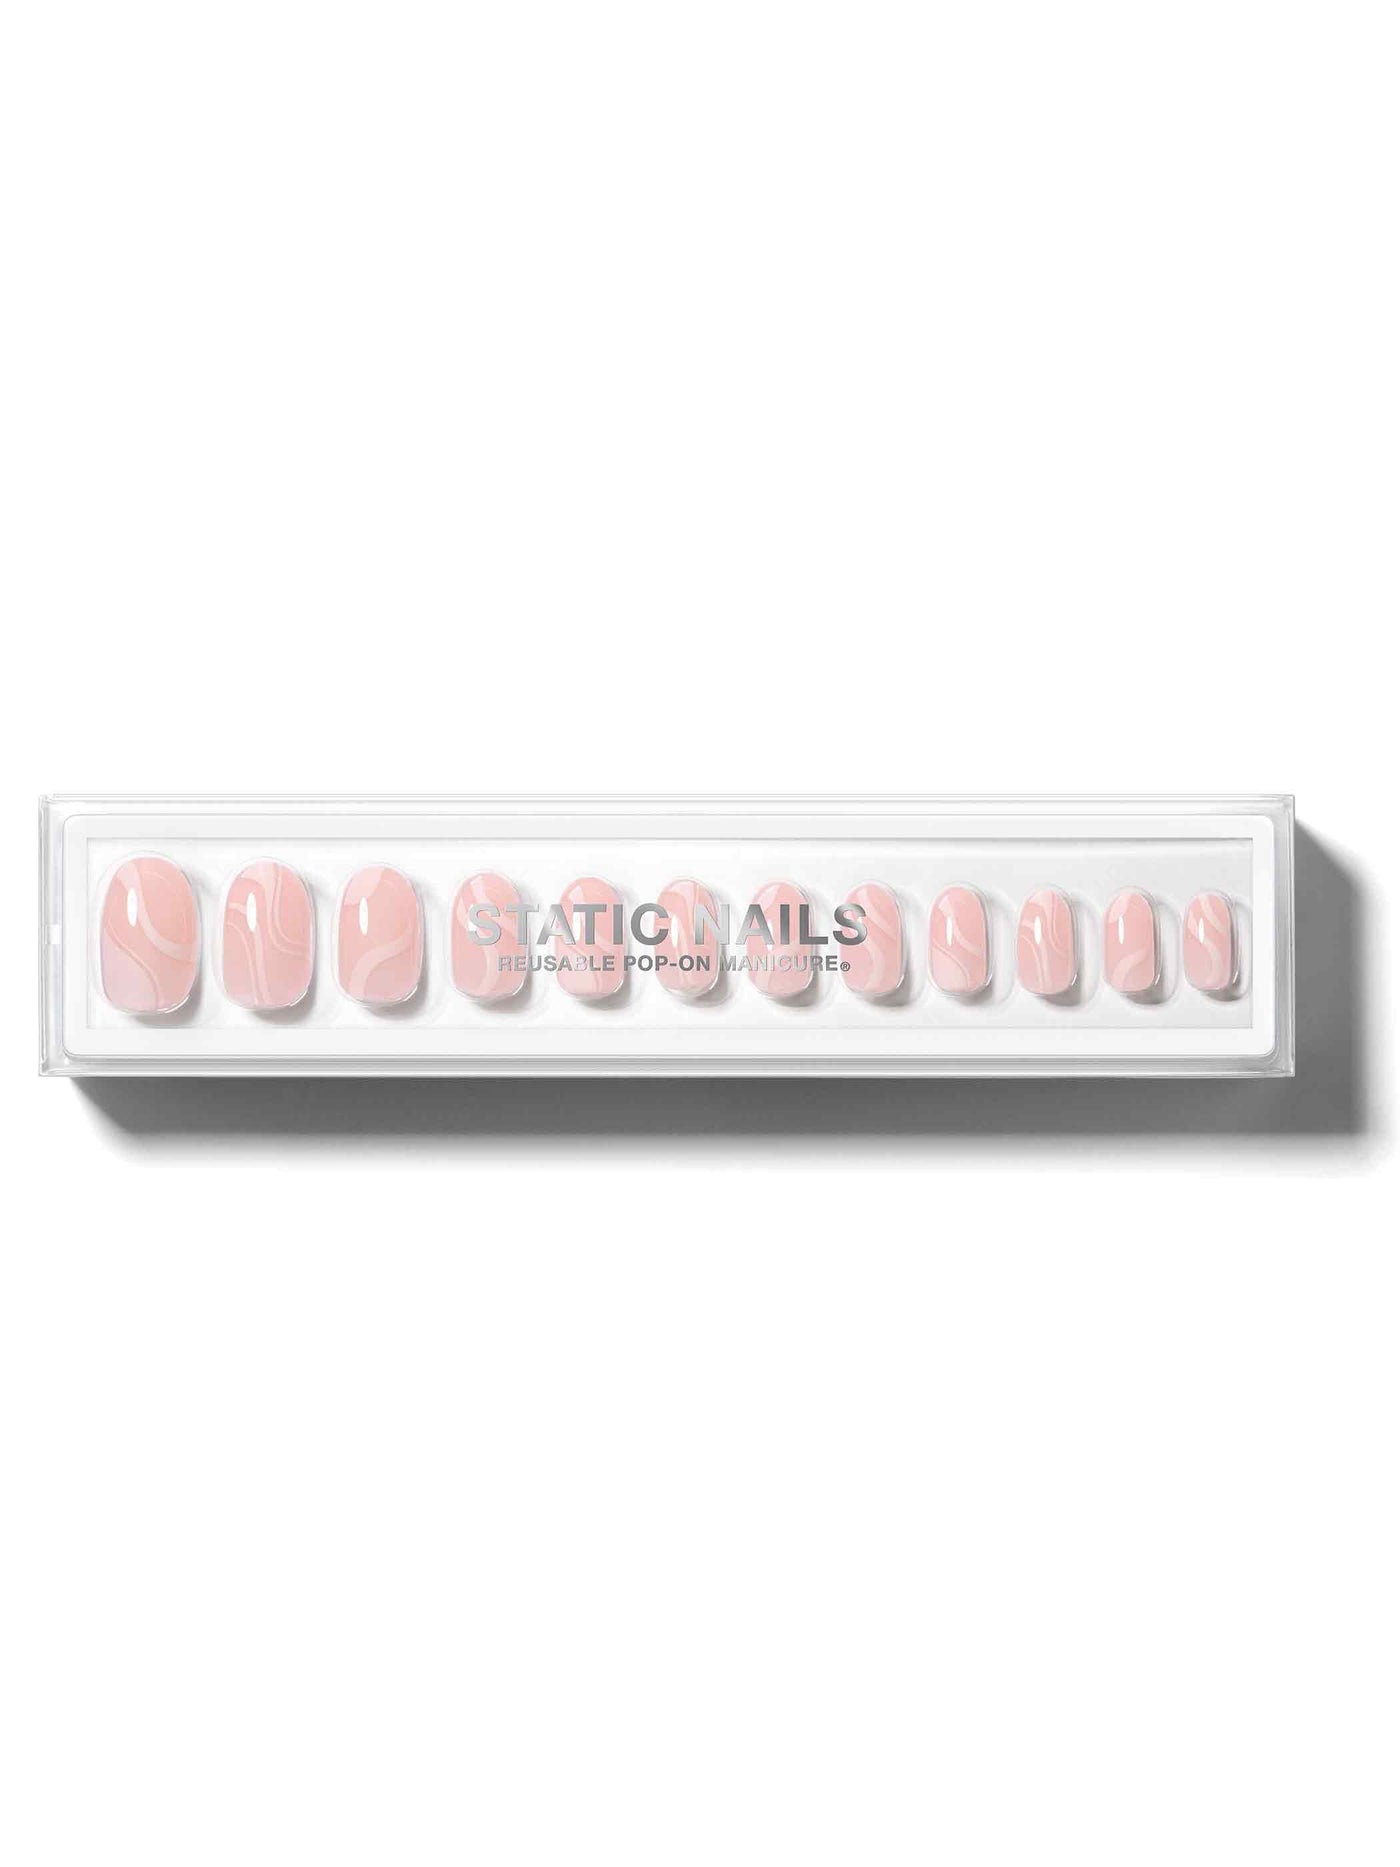 Soft pink wave design on all nails in round shape,